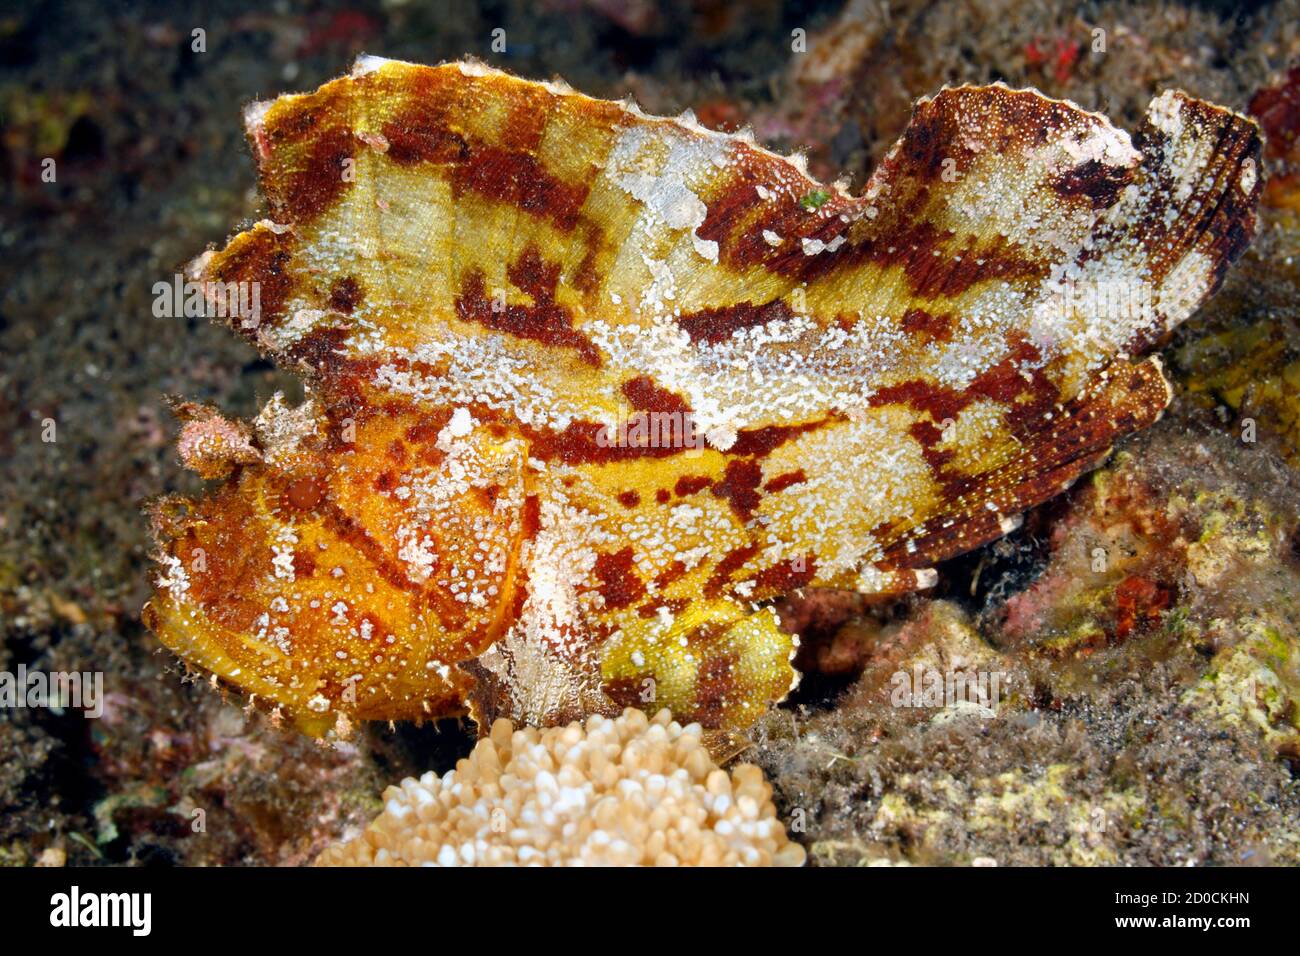 Leaf Scorpionfish, Taenianotus triacanthus, yellow, white and brown variation. Also known as a Paperfish and Paper Scorpionfish. Tulamben, Bali, Indon Stock Photo